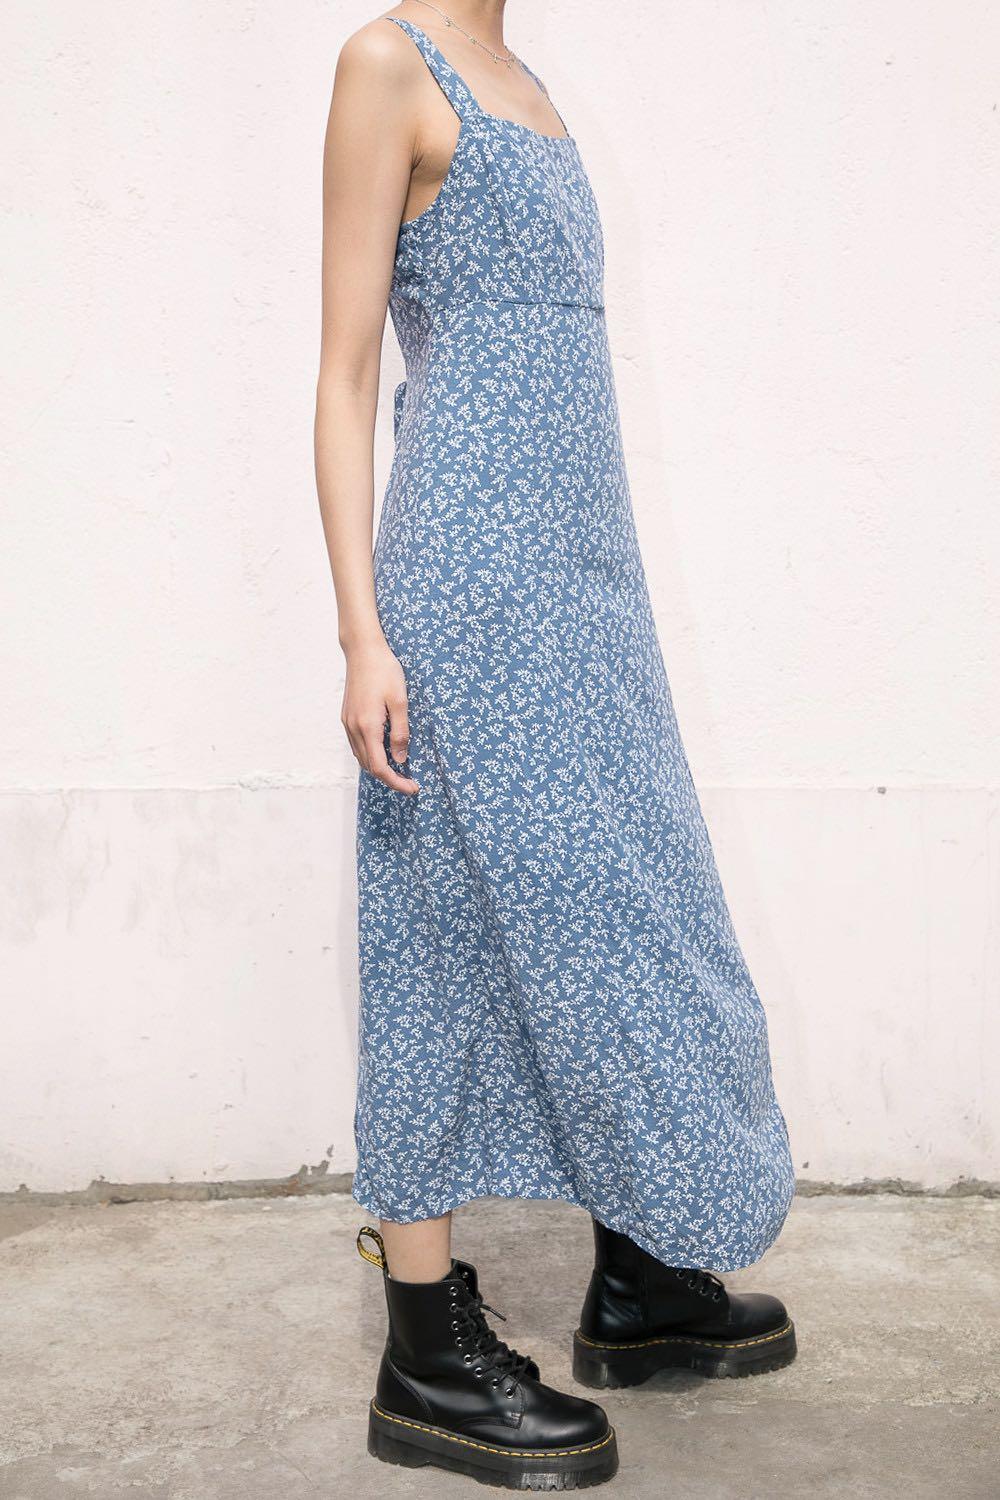 brandy melville colleen maxi dress in blue floral, Women's Fashion